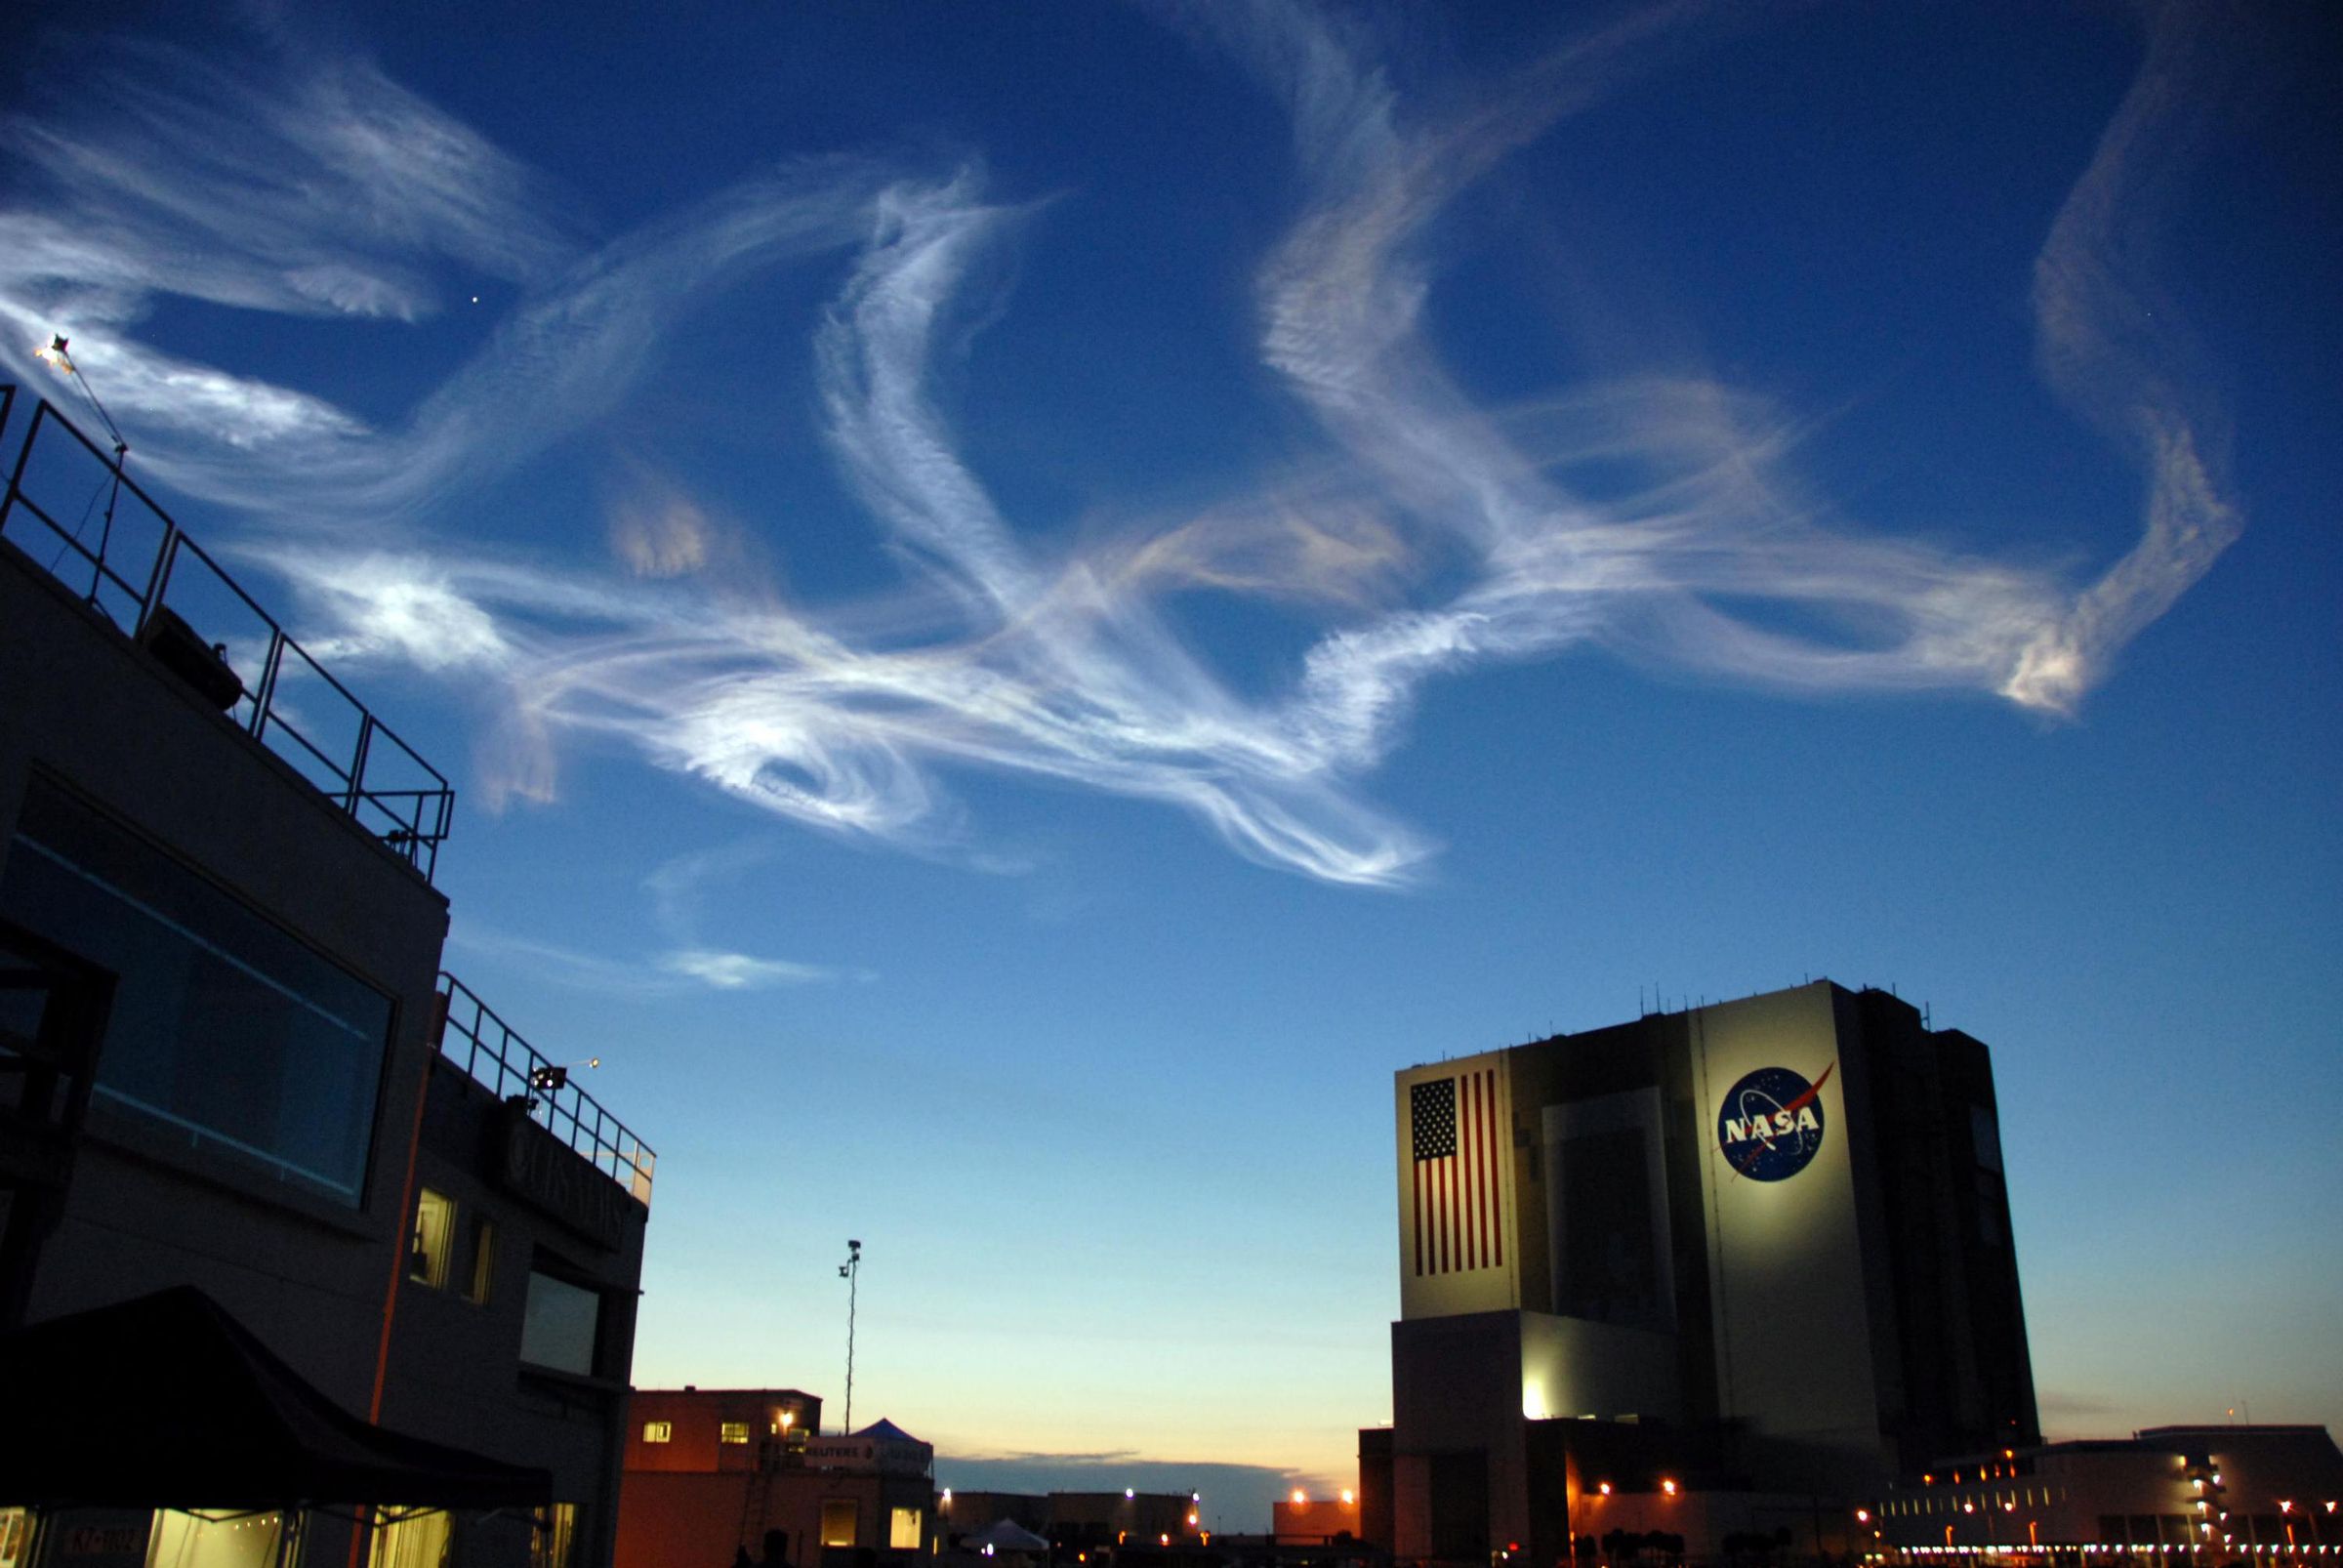 Drifting plumes created by the Space Shuttle Atlantis.